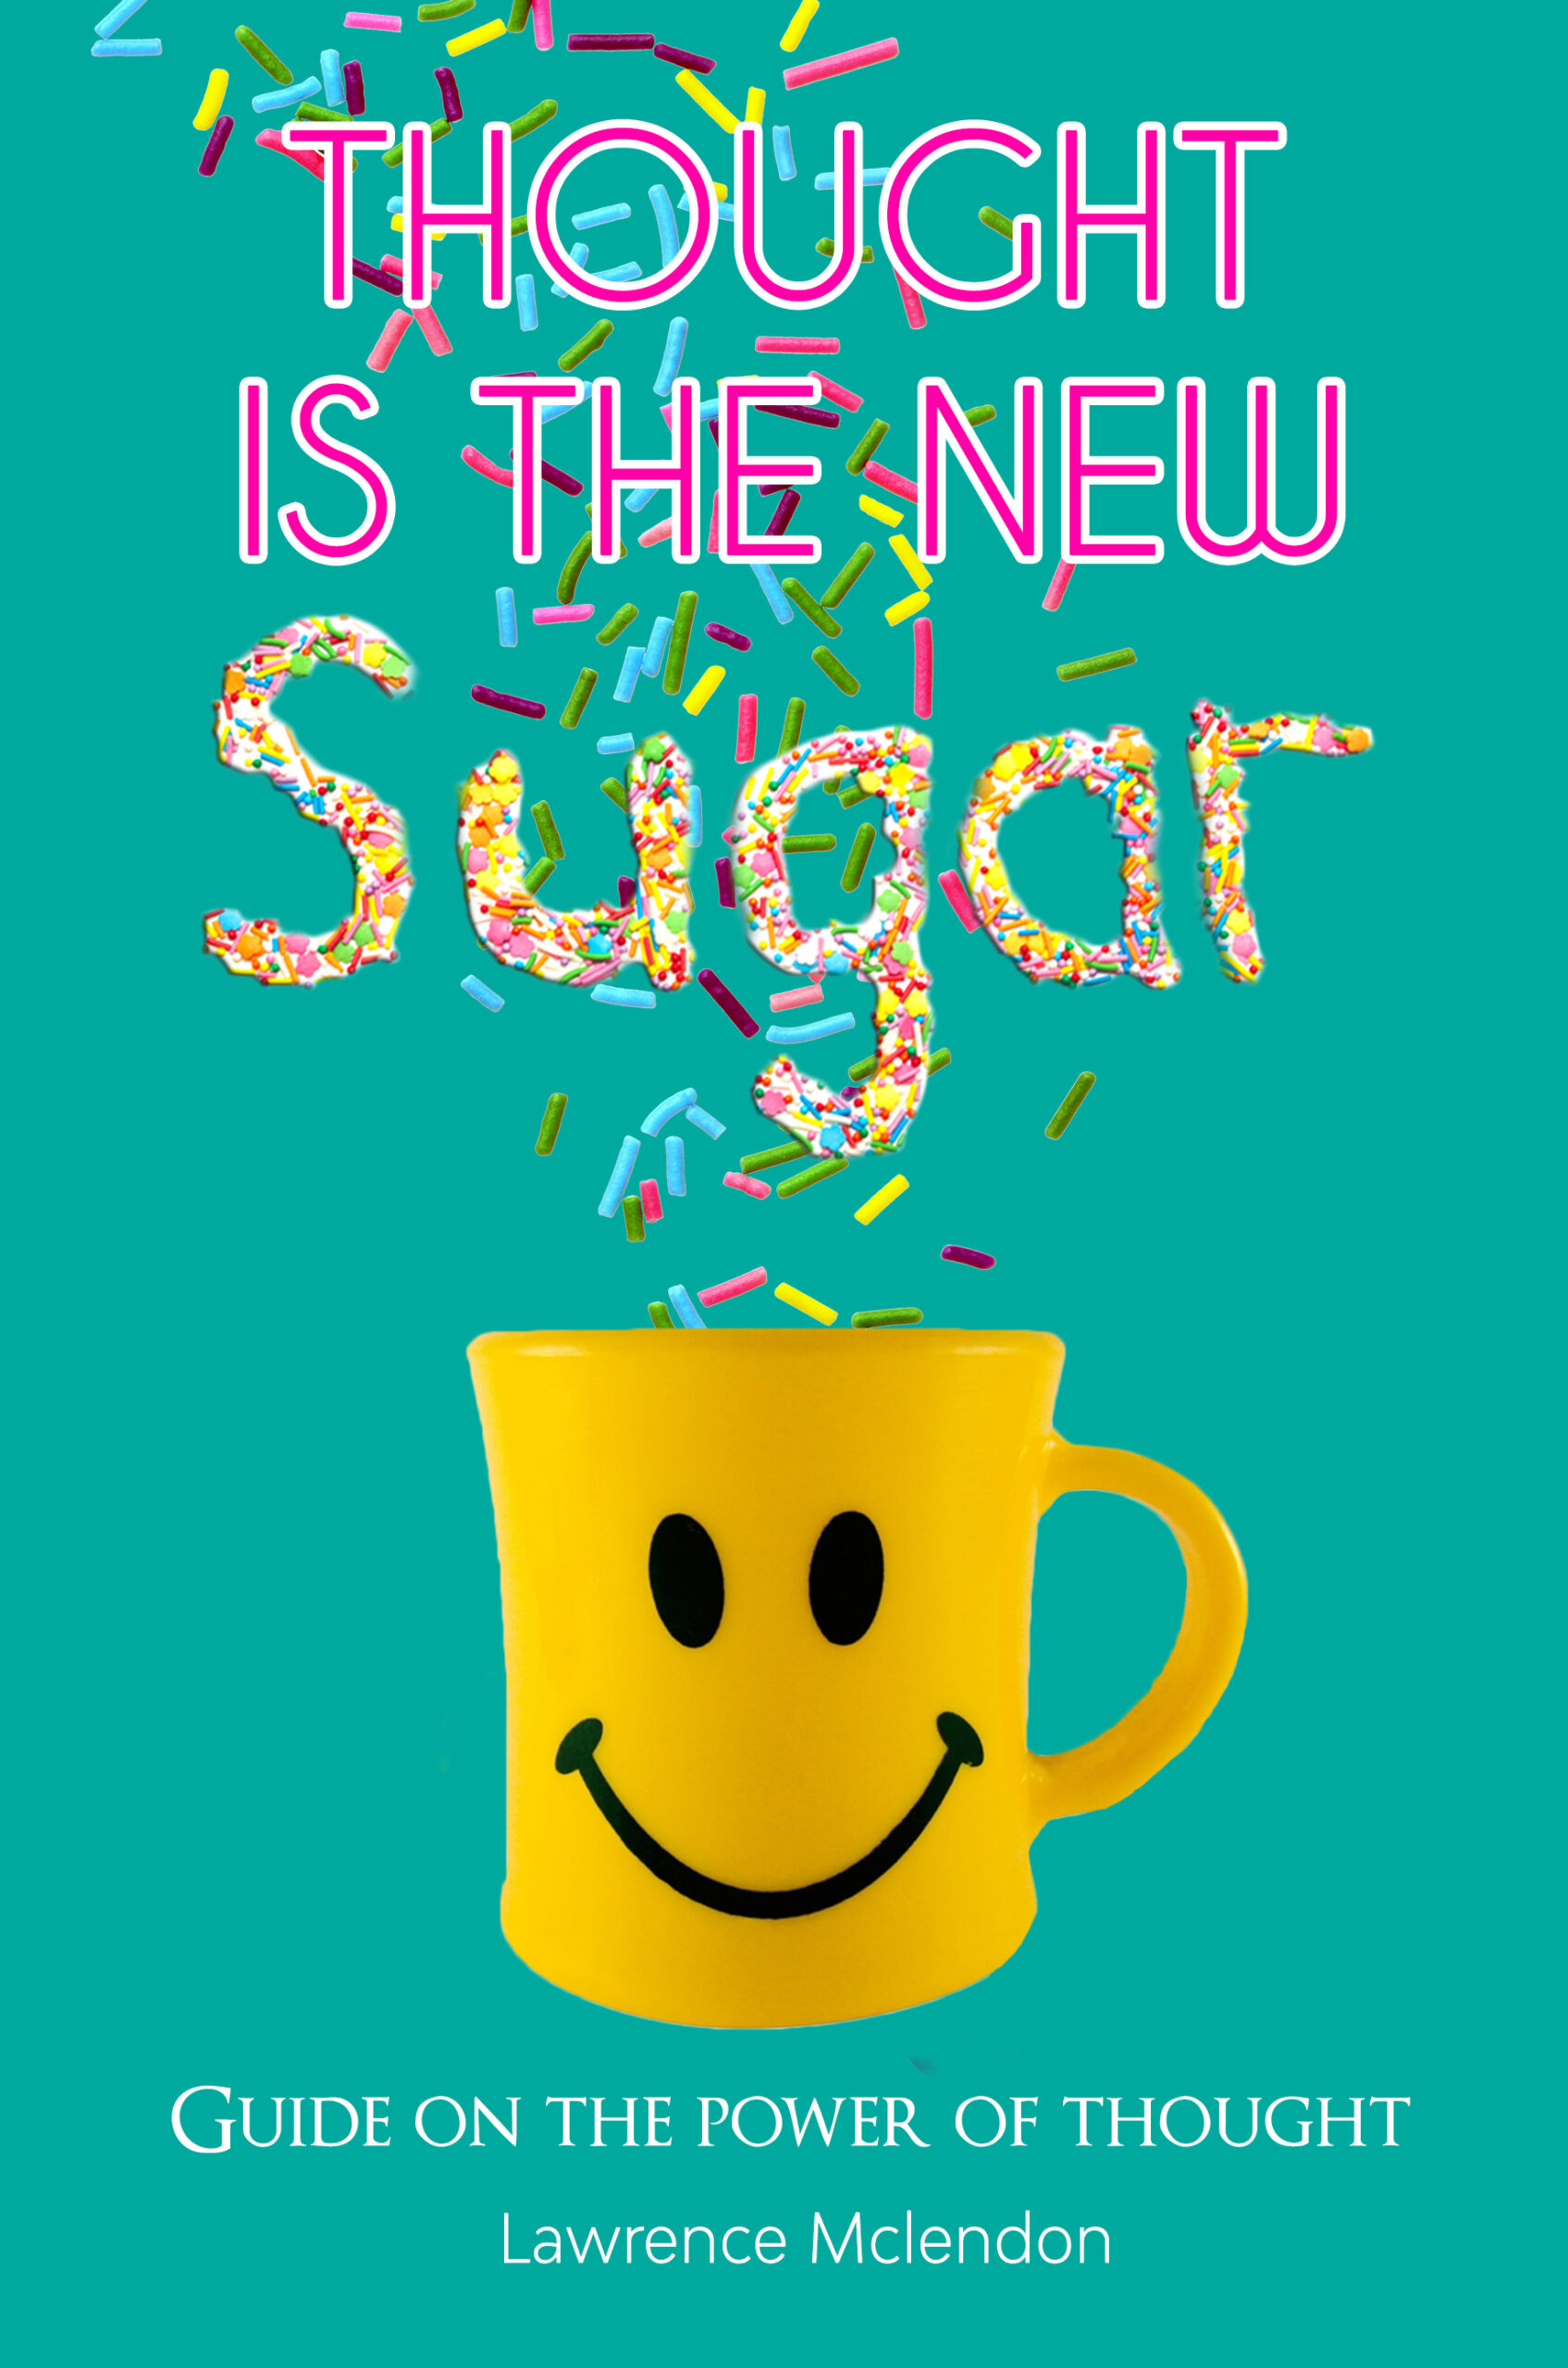 FREE: Thought is the new sugar by Lawrence mclendon